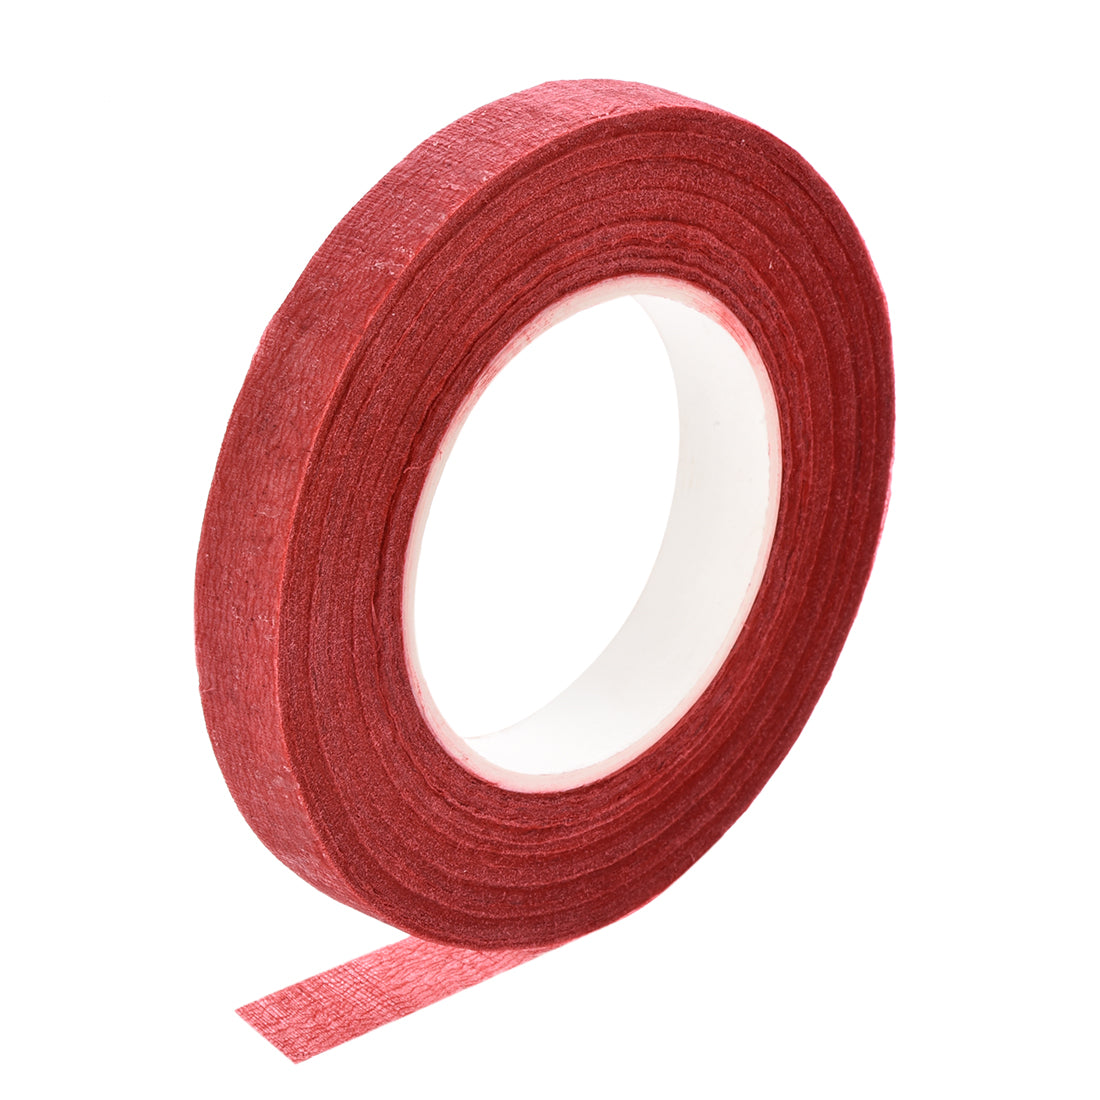 uxcell Uxcell 1Roll 1/2"x30Yard Red Floral Tape Flower Adhesives Floral Arrangement Kit